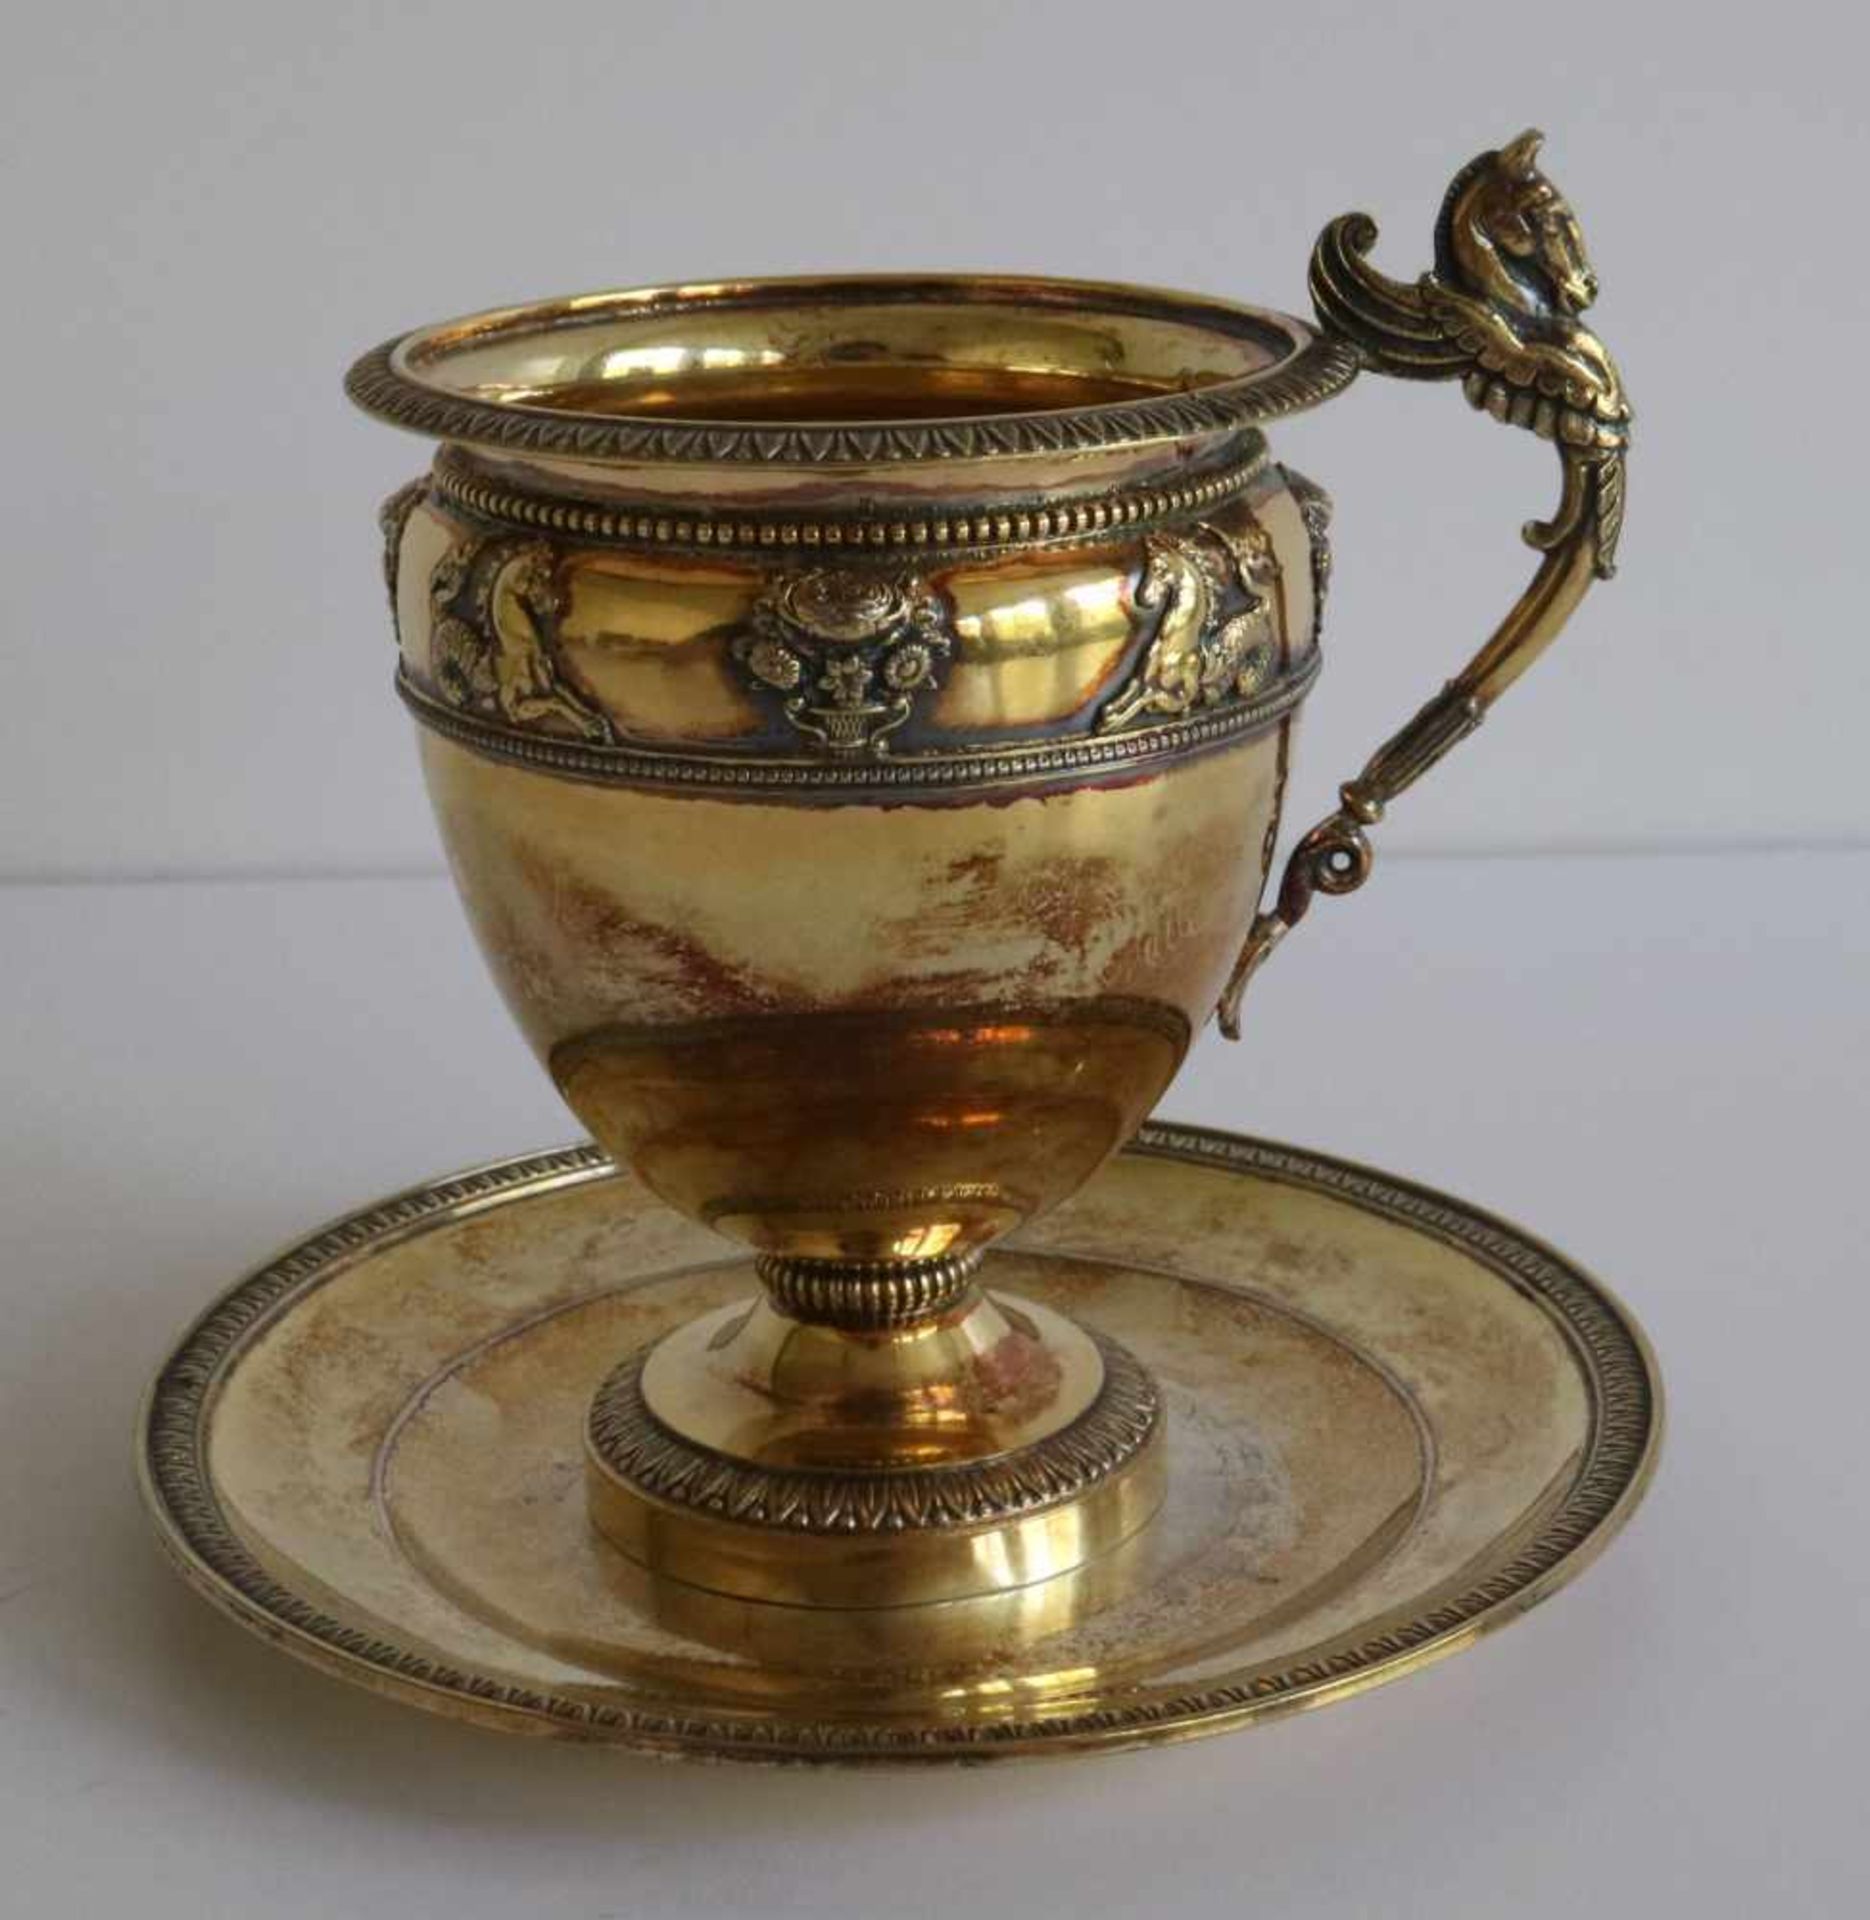 Chocolate cup with saucer silver with vermeille, Paris 1818 - 1838, 293 grams H 12 dia 13,5 cm